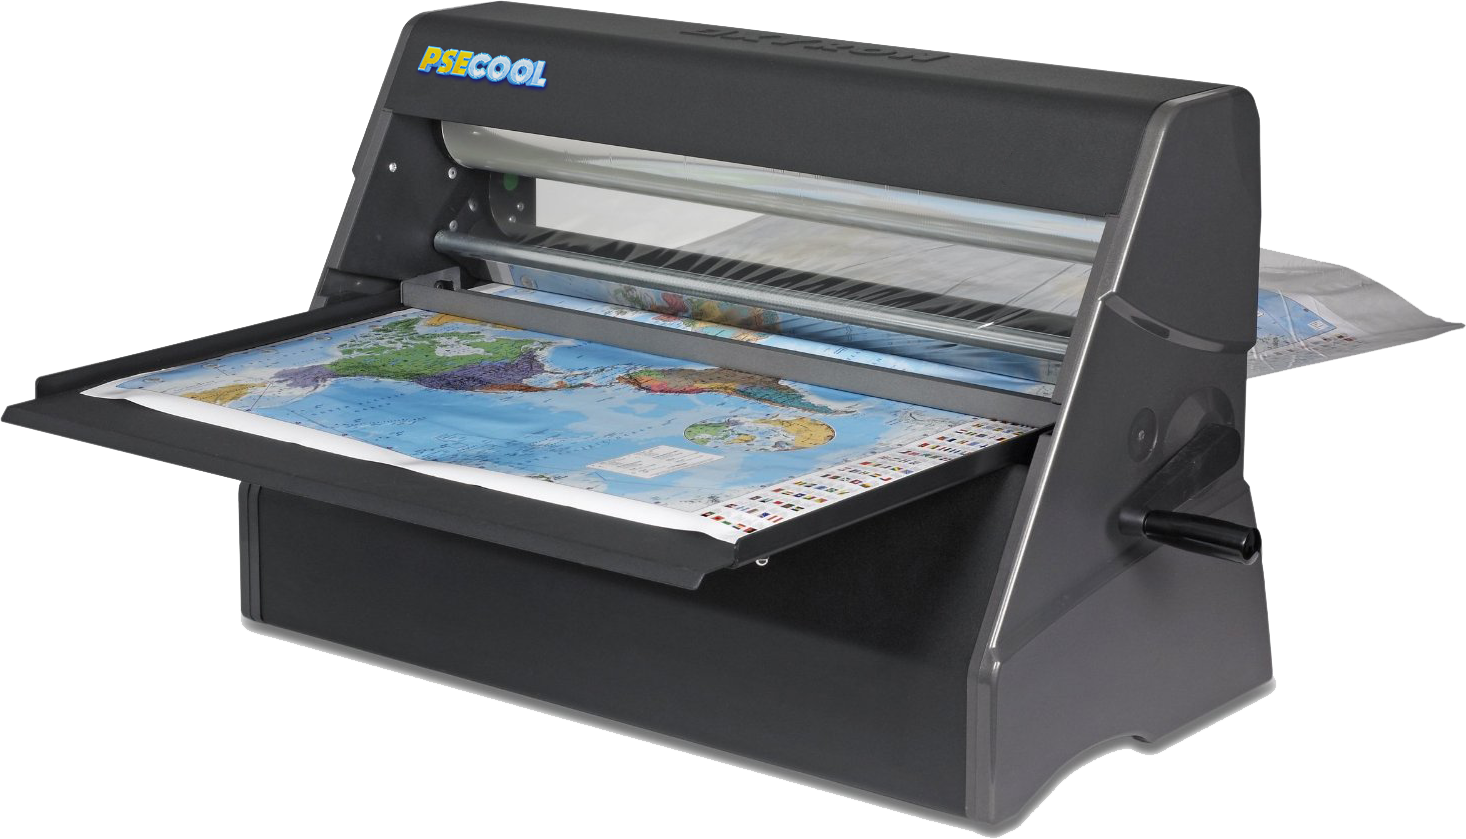 School Laminators - the PSECool laminating system reqauires no heat or electricity, and provides a strong, glossy laminate that will protect your creations for years to come!